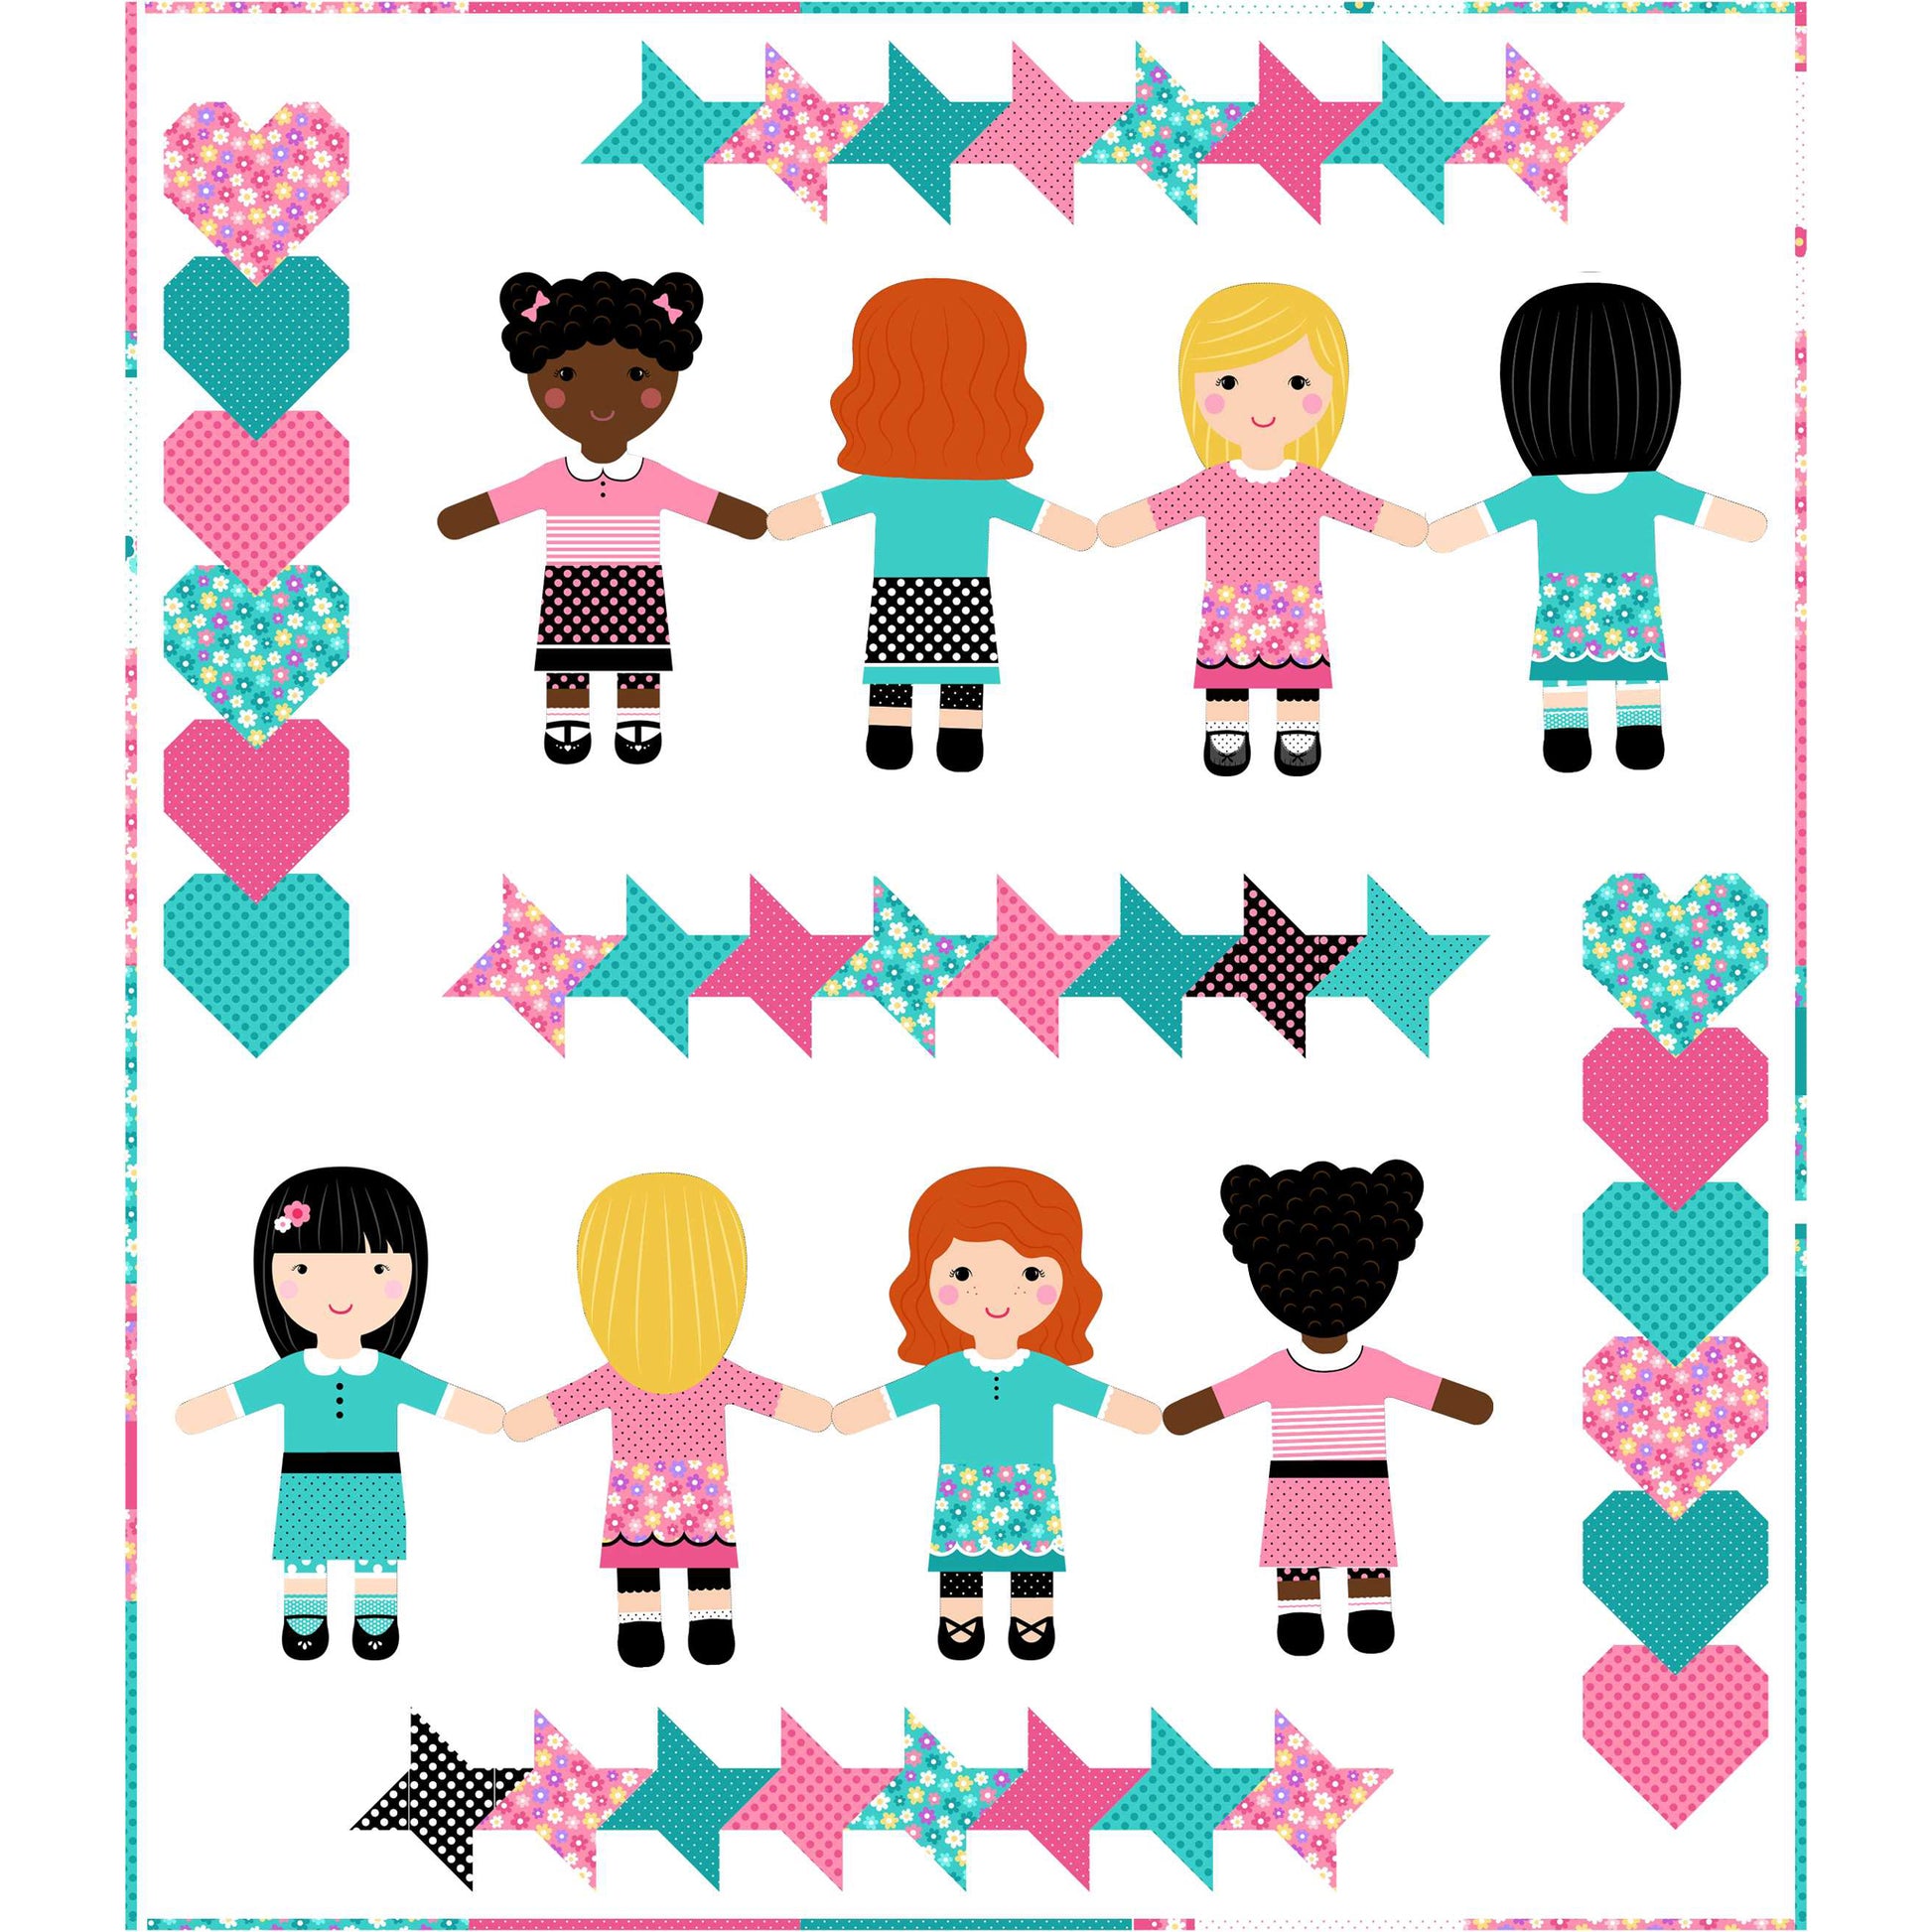 Colorful quilt with children and hearts design, perfect for a child's bedroom decor.